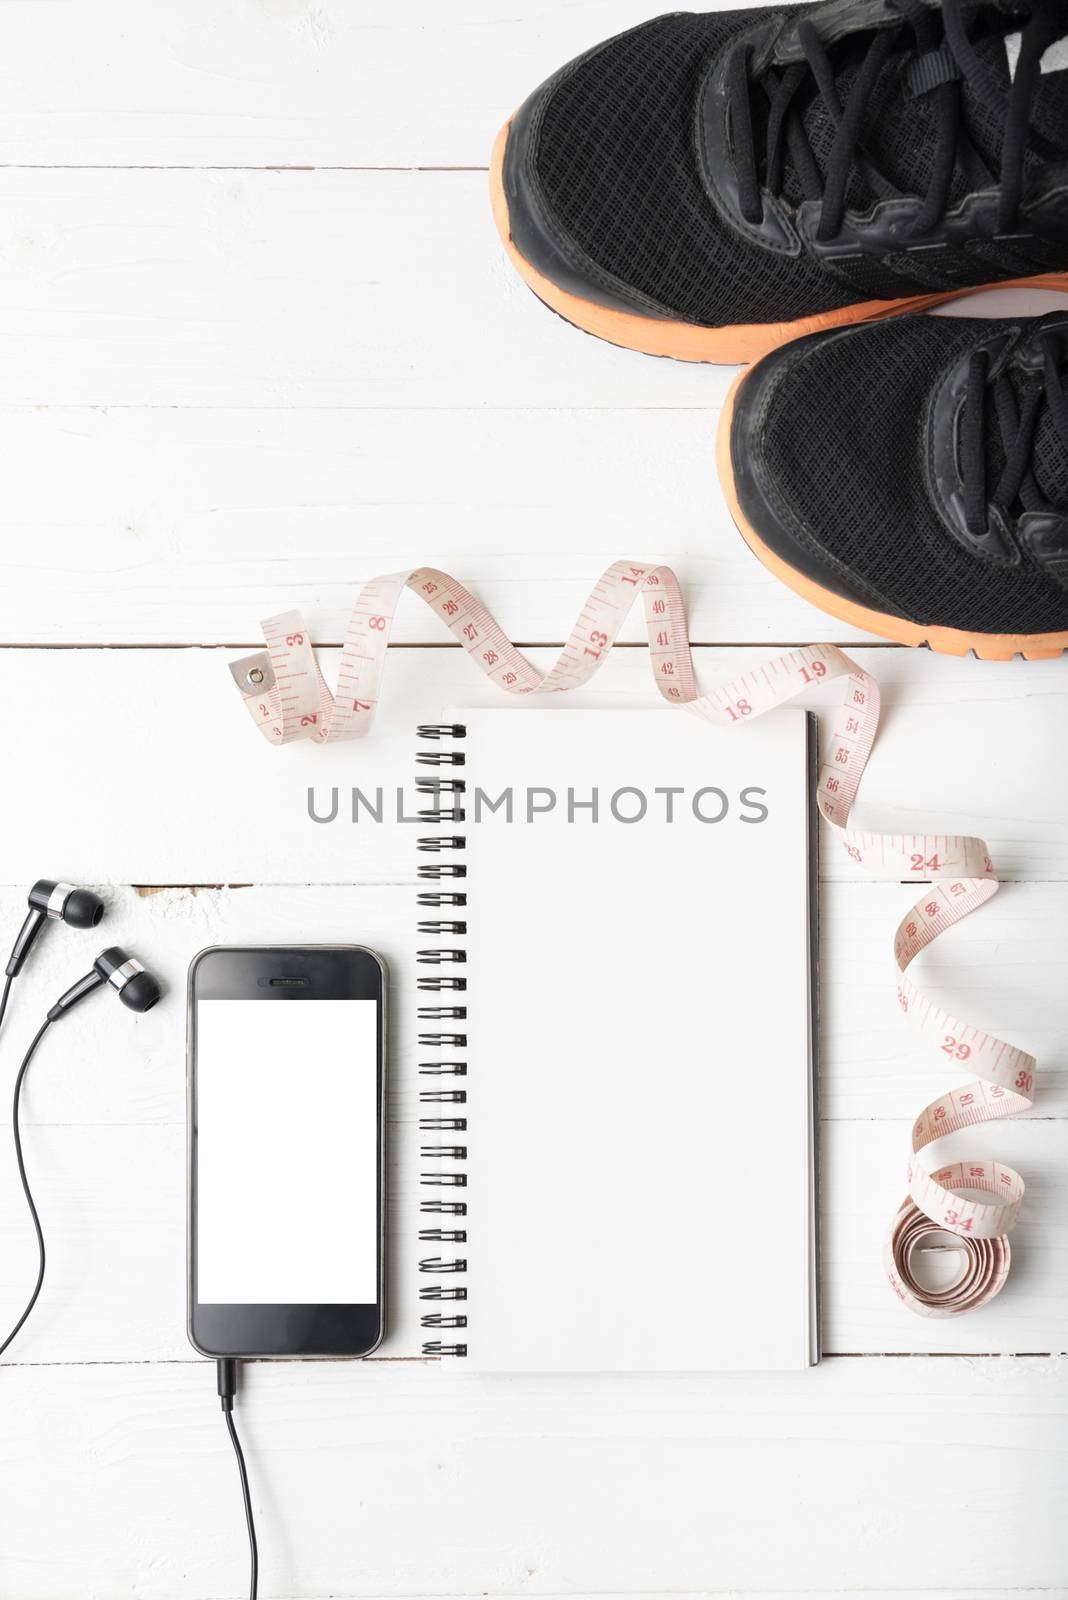 running shoes,measuring tape,notebook and phone on white wood table